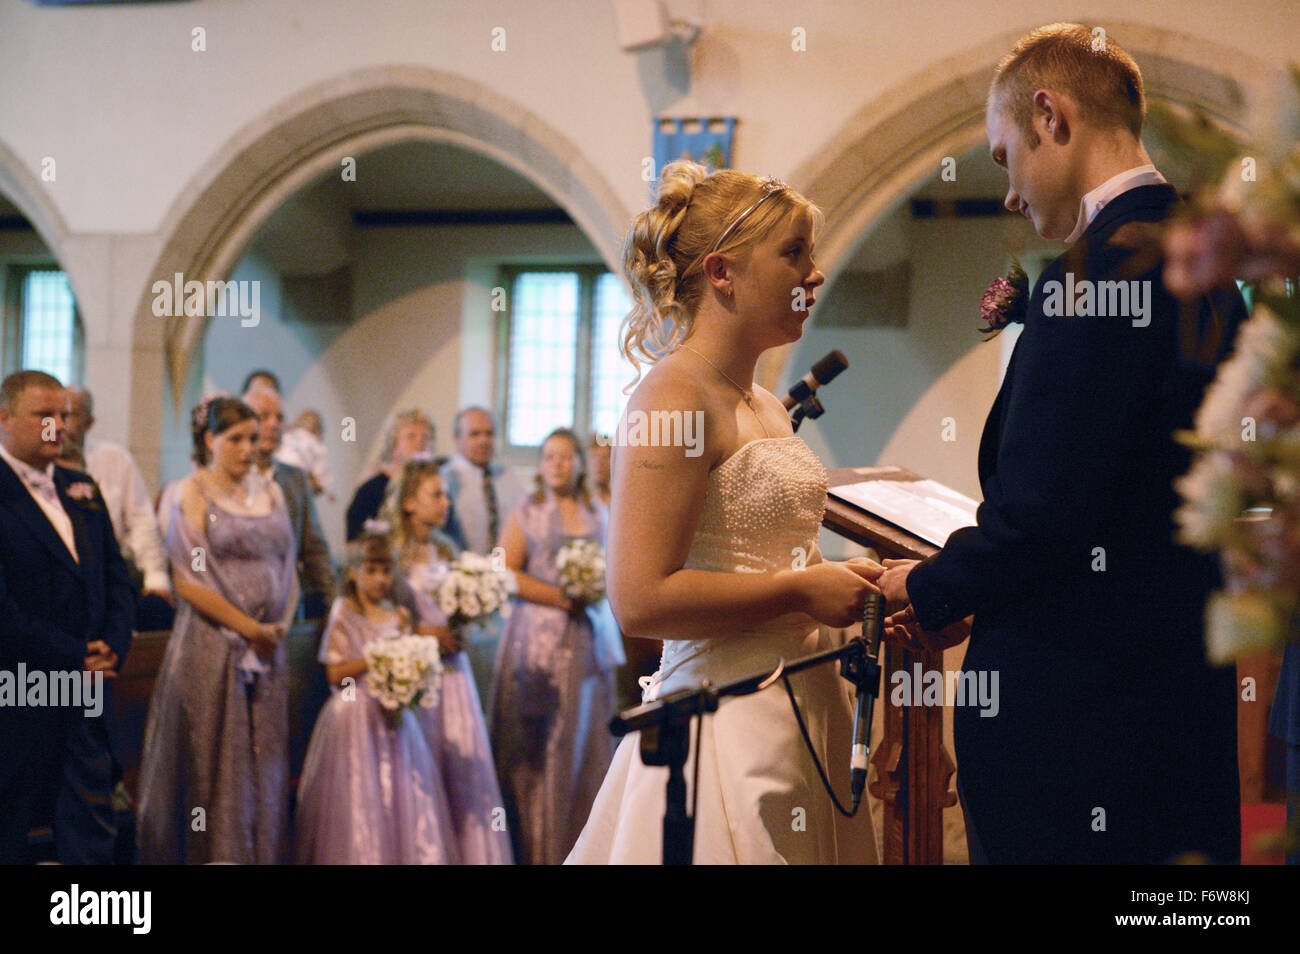 Bride And Groom Saying Wedding Vows During Marriage Ceremony Stock